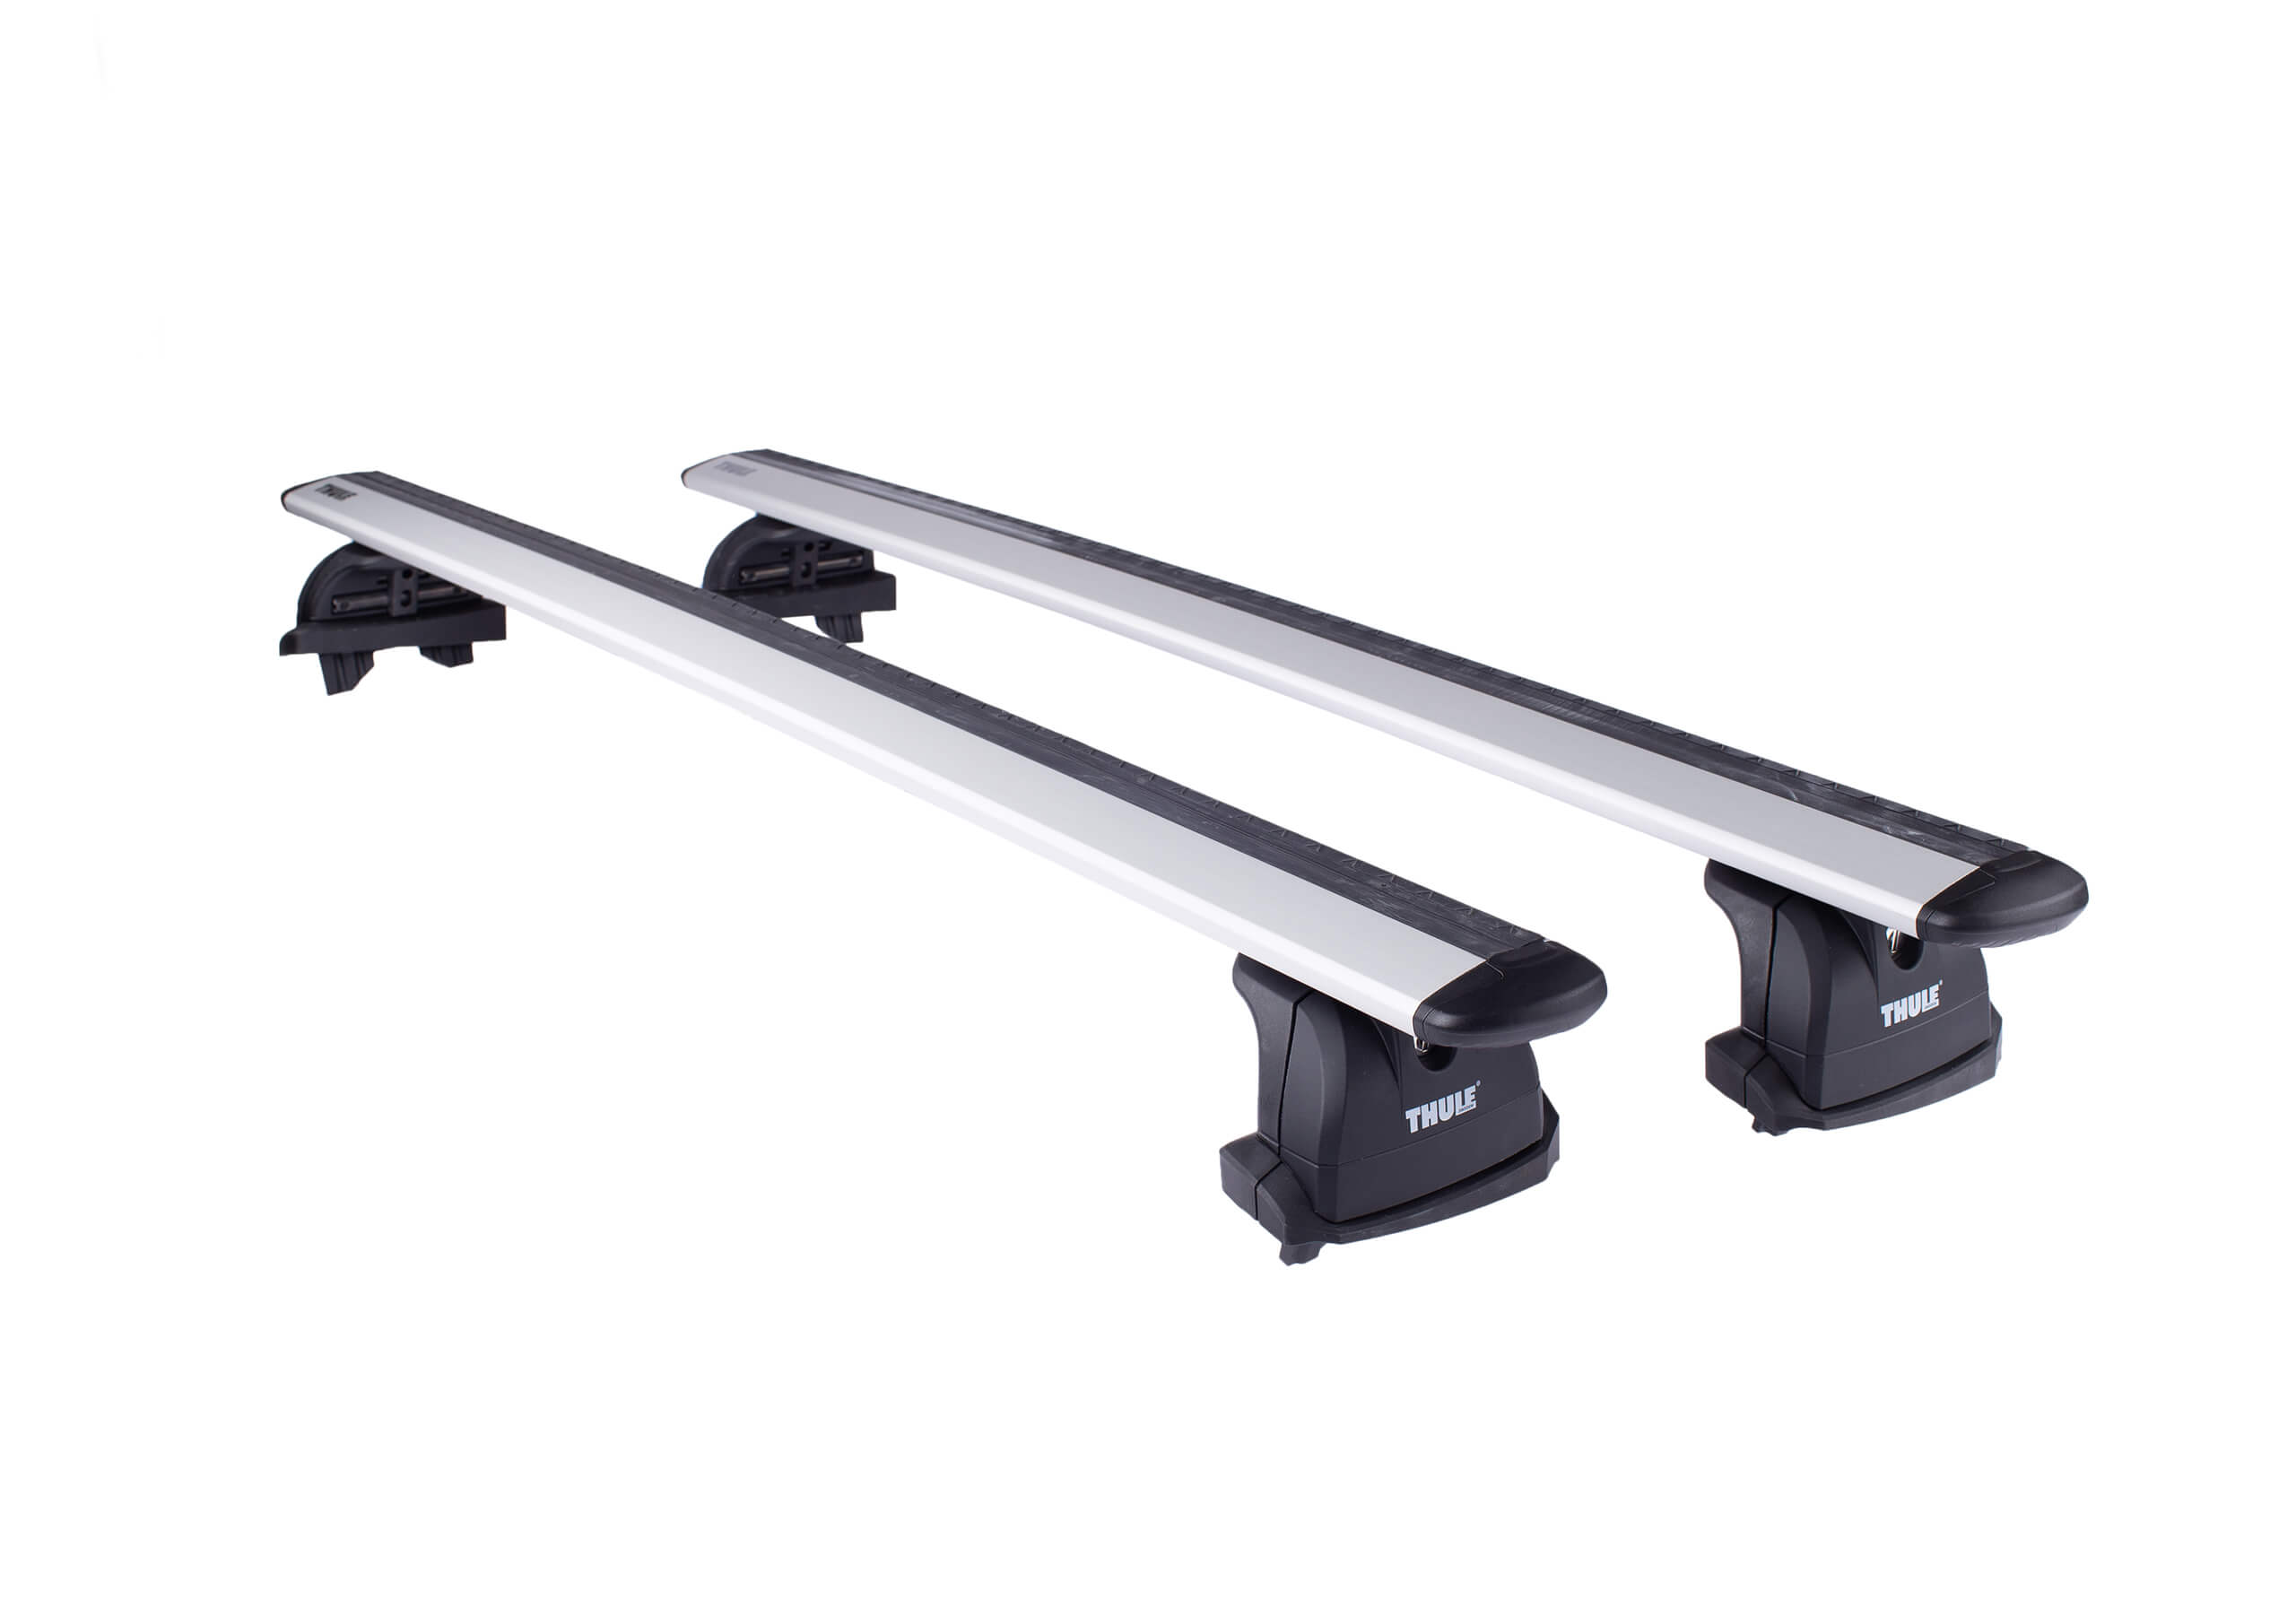 Ford Focus C-Max (2003 to 2010):Thule silver Evo WingBars package - 753, 7112, 3015